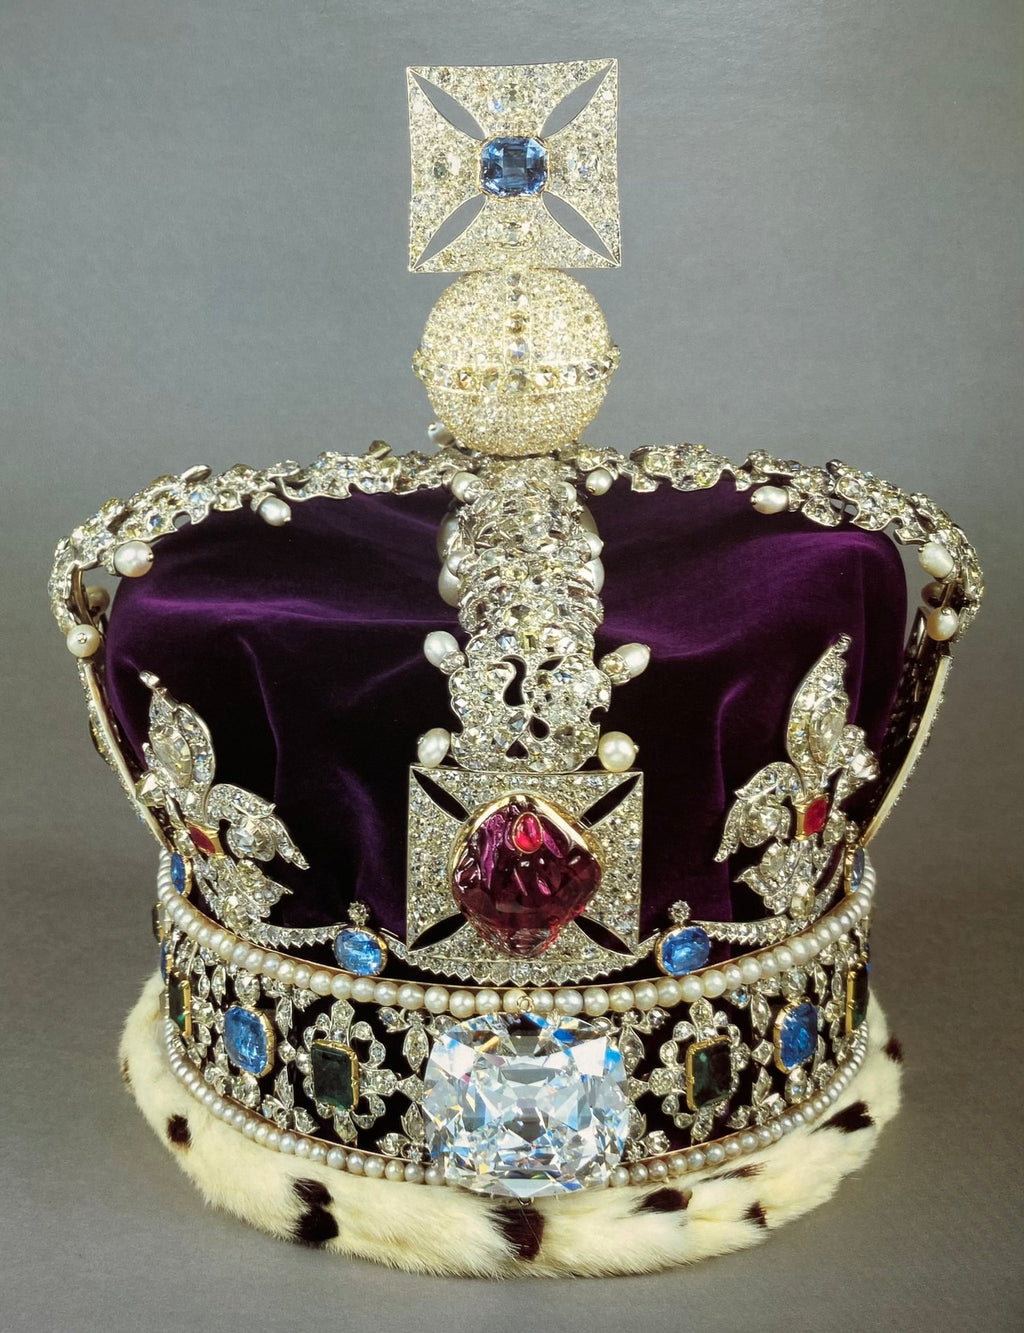 The Imperial State Crown - set with 2,868 diamonds, 17 sapphires, 11 emeralds, 269 pearls